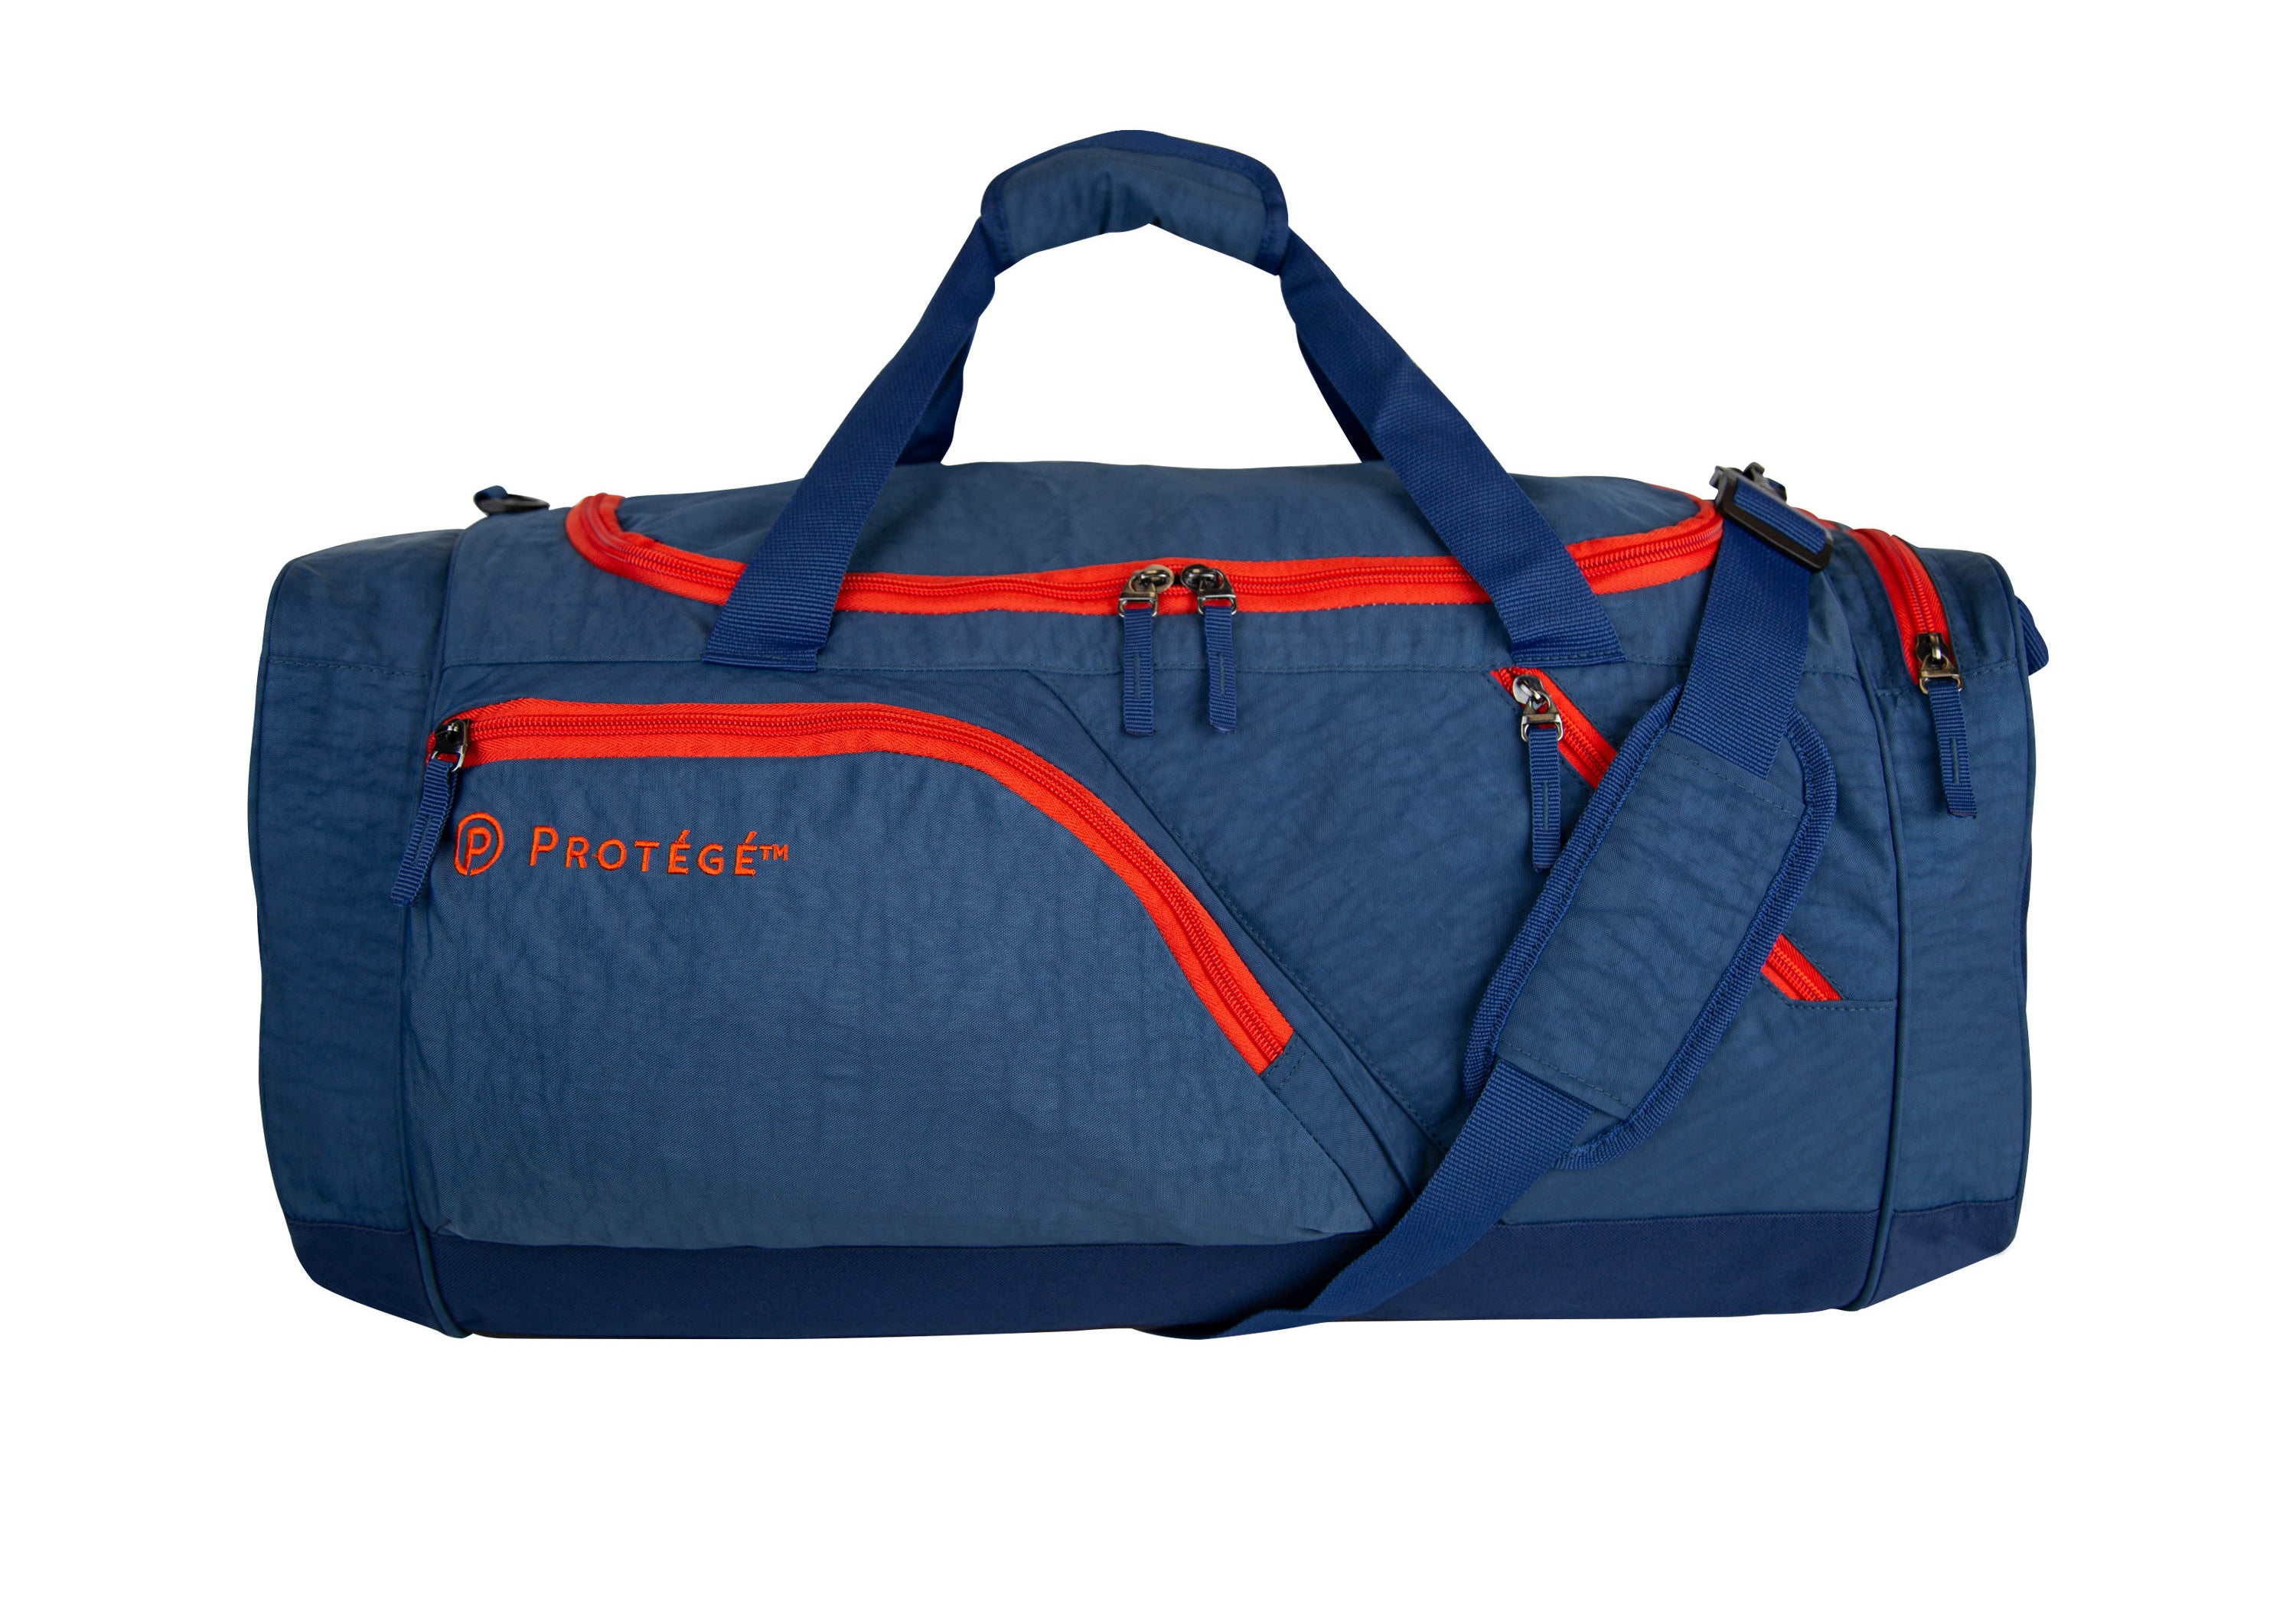 The duffle in blue with red accents, featuring a padded shoulder strap and carry straps